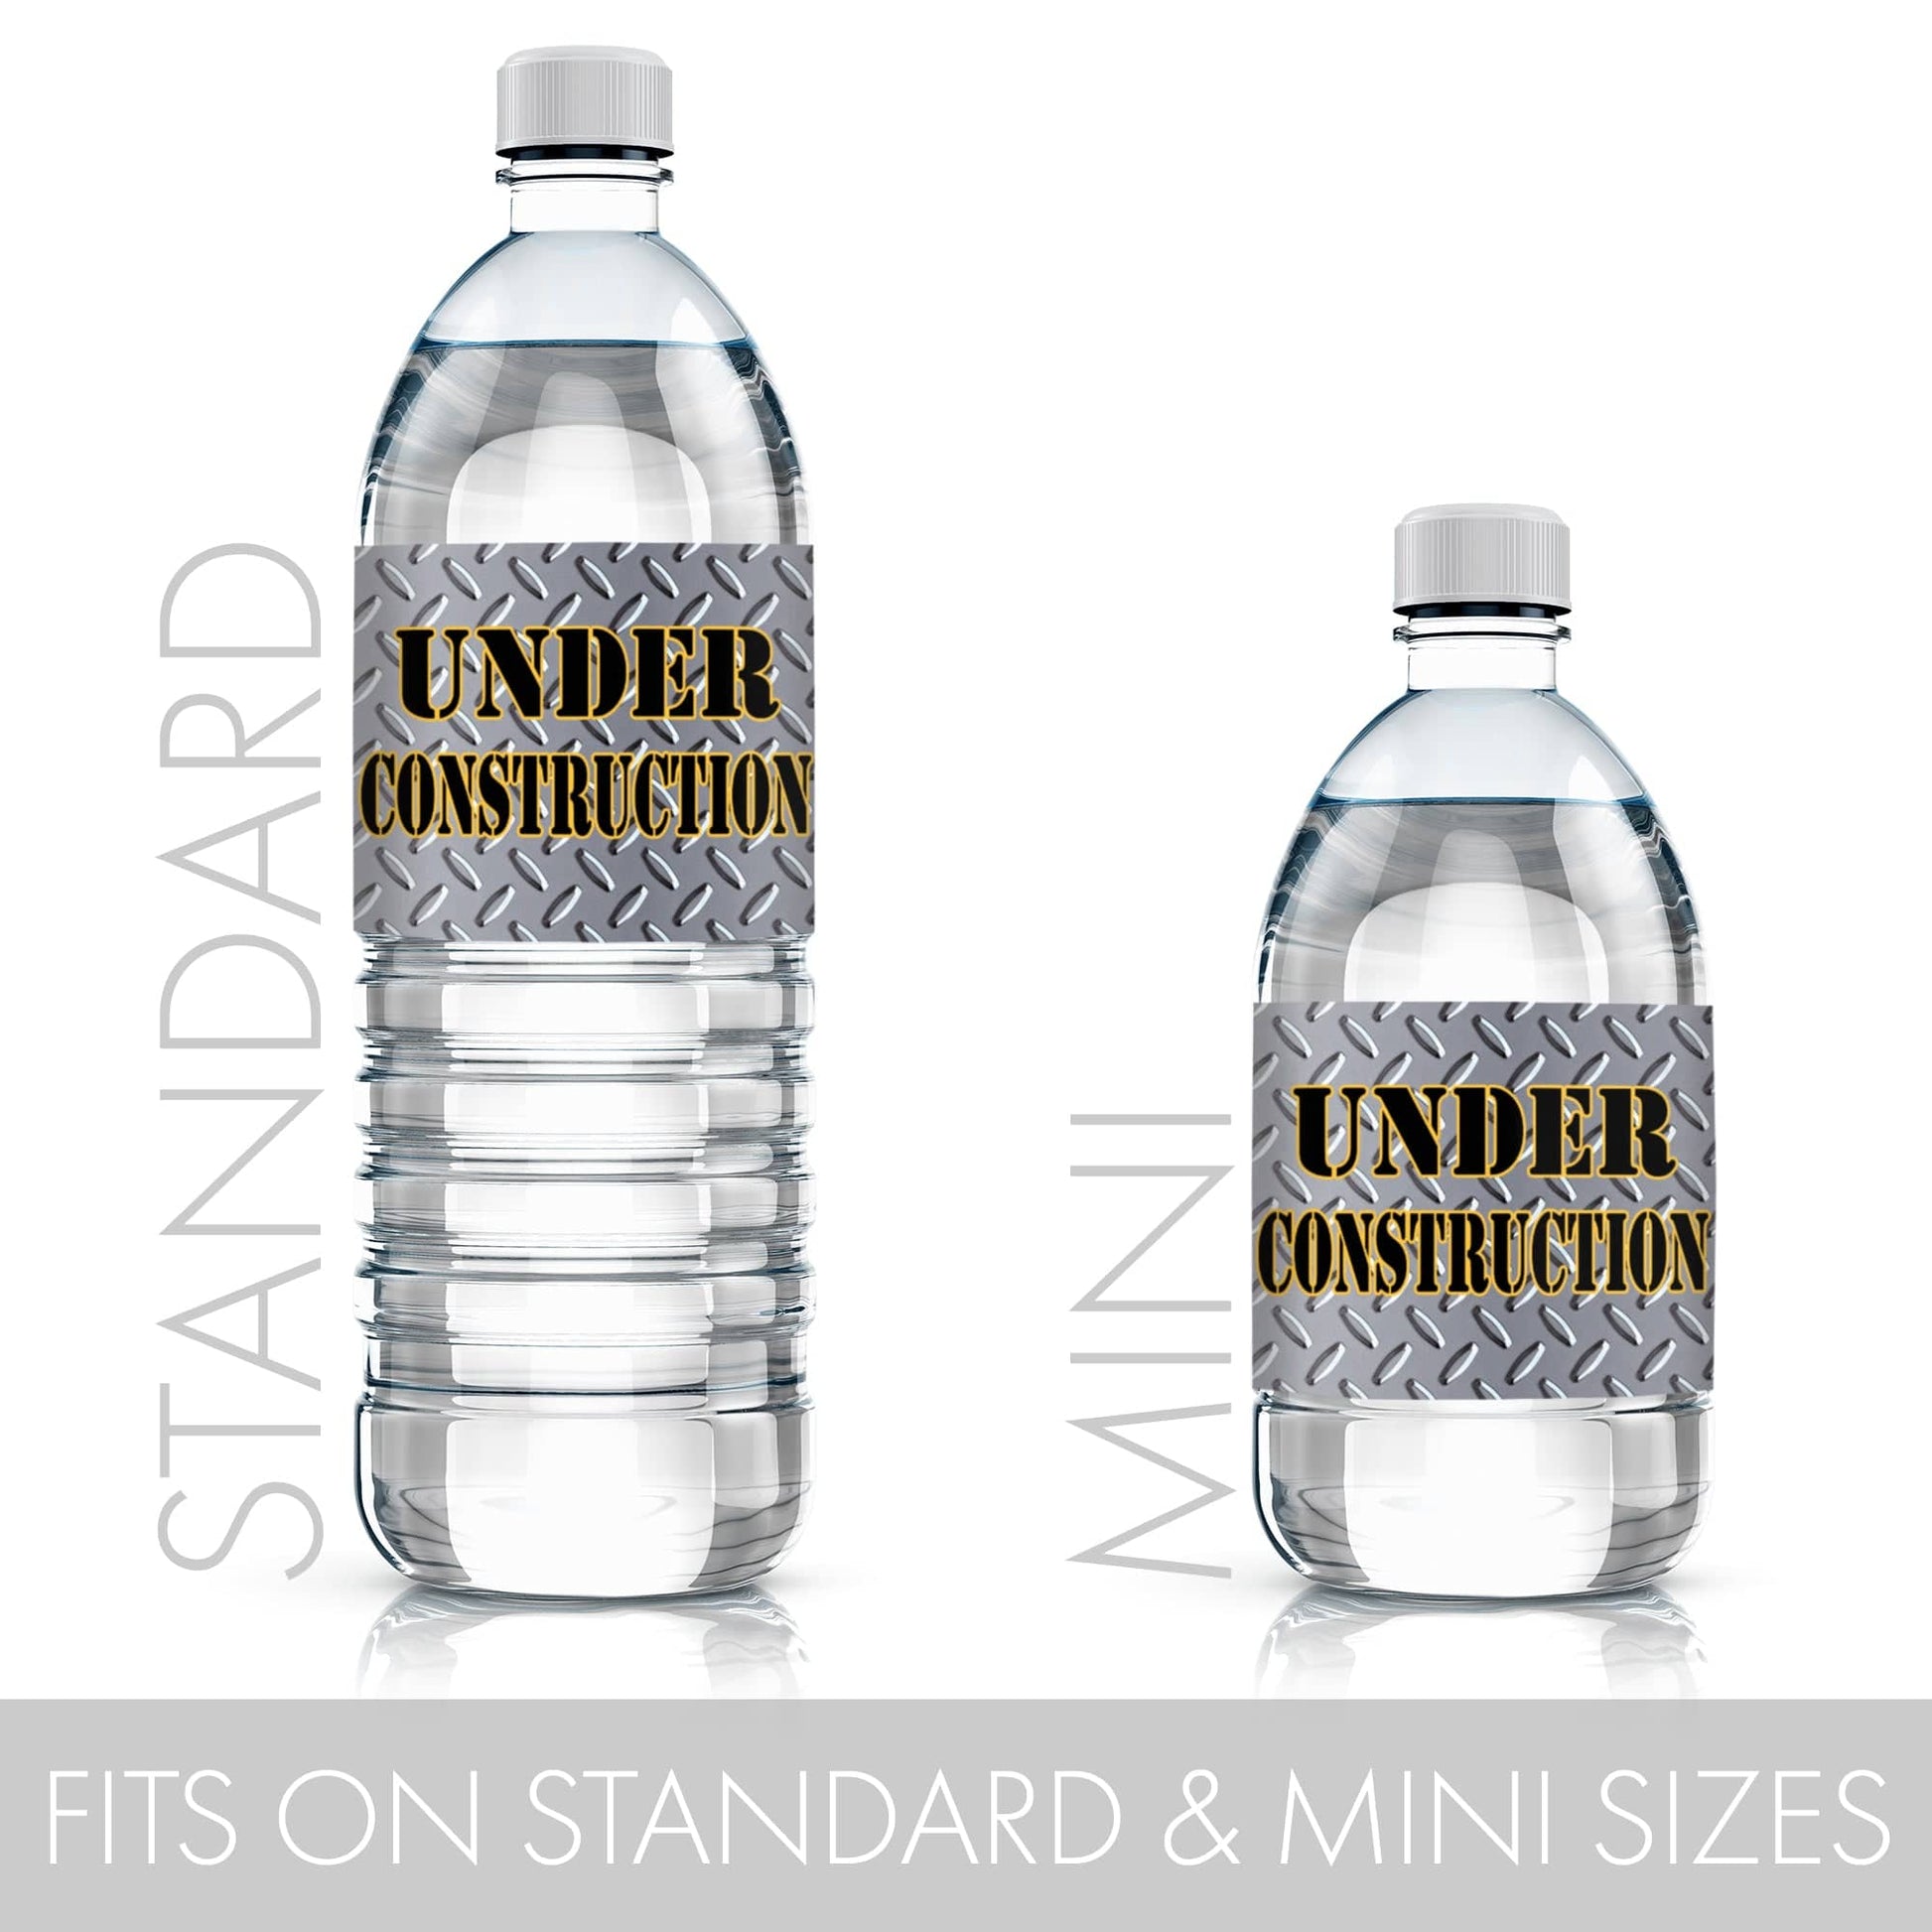 Under Construction Party Water Bottle Labels - 24 Stickers